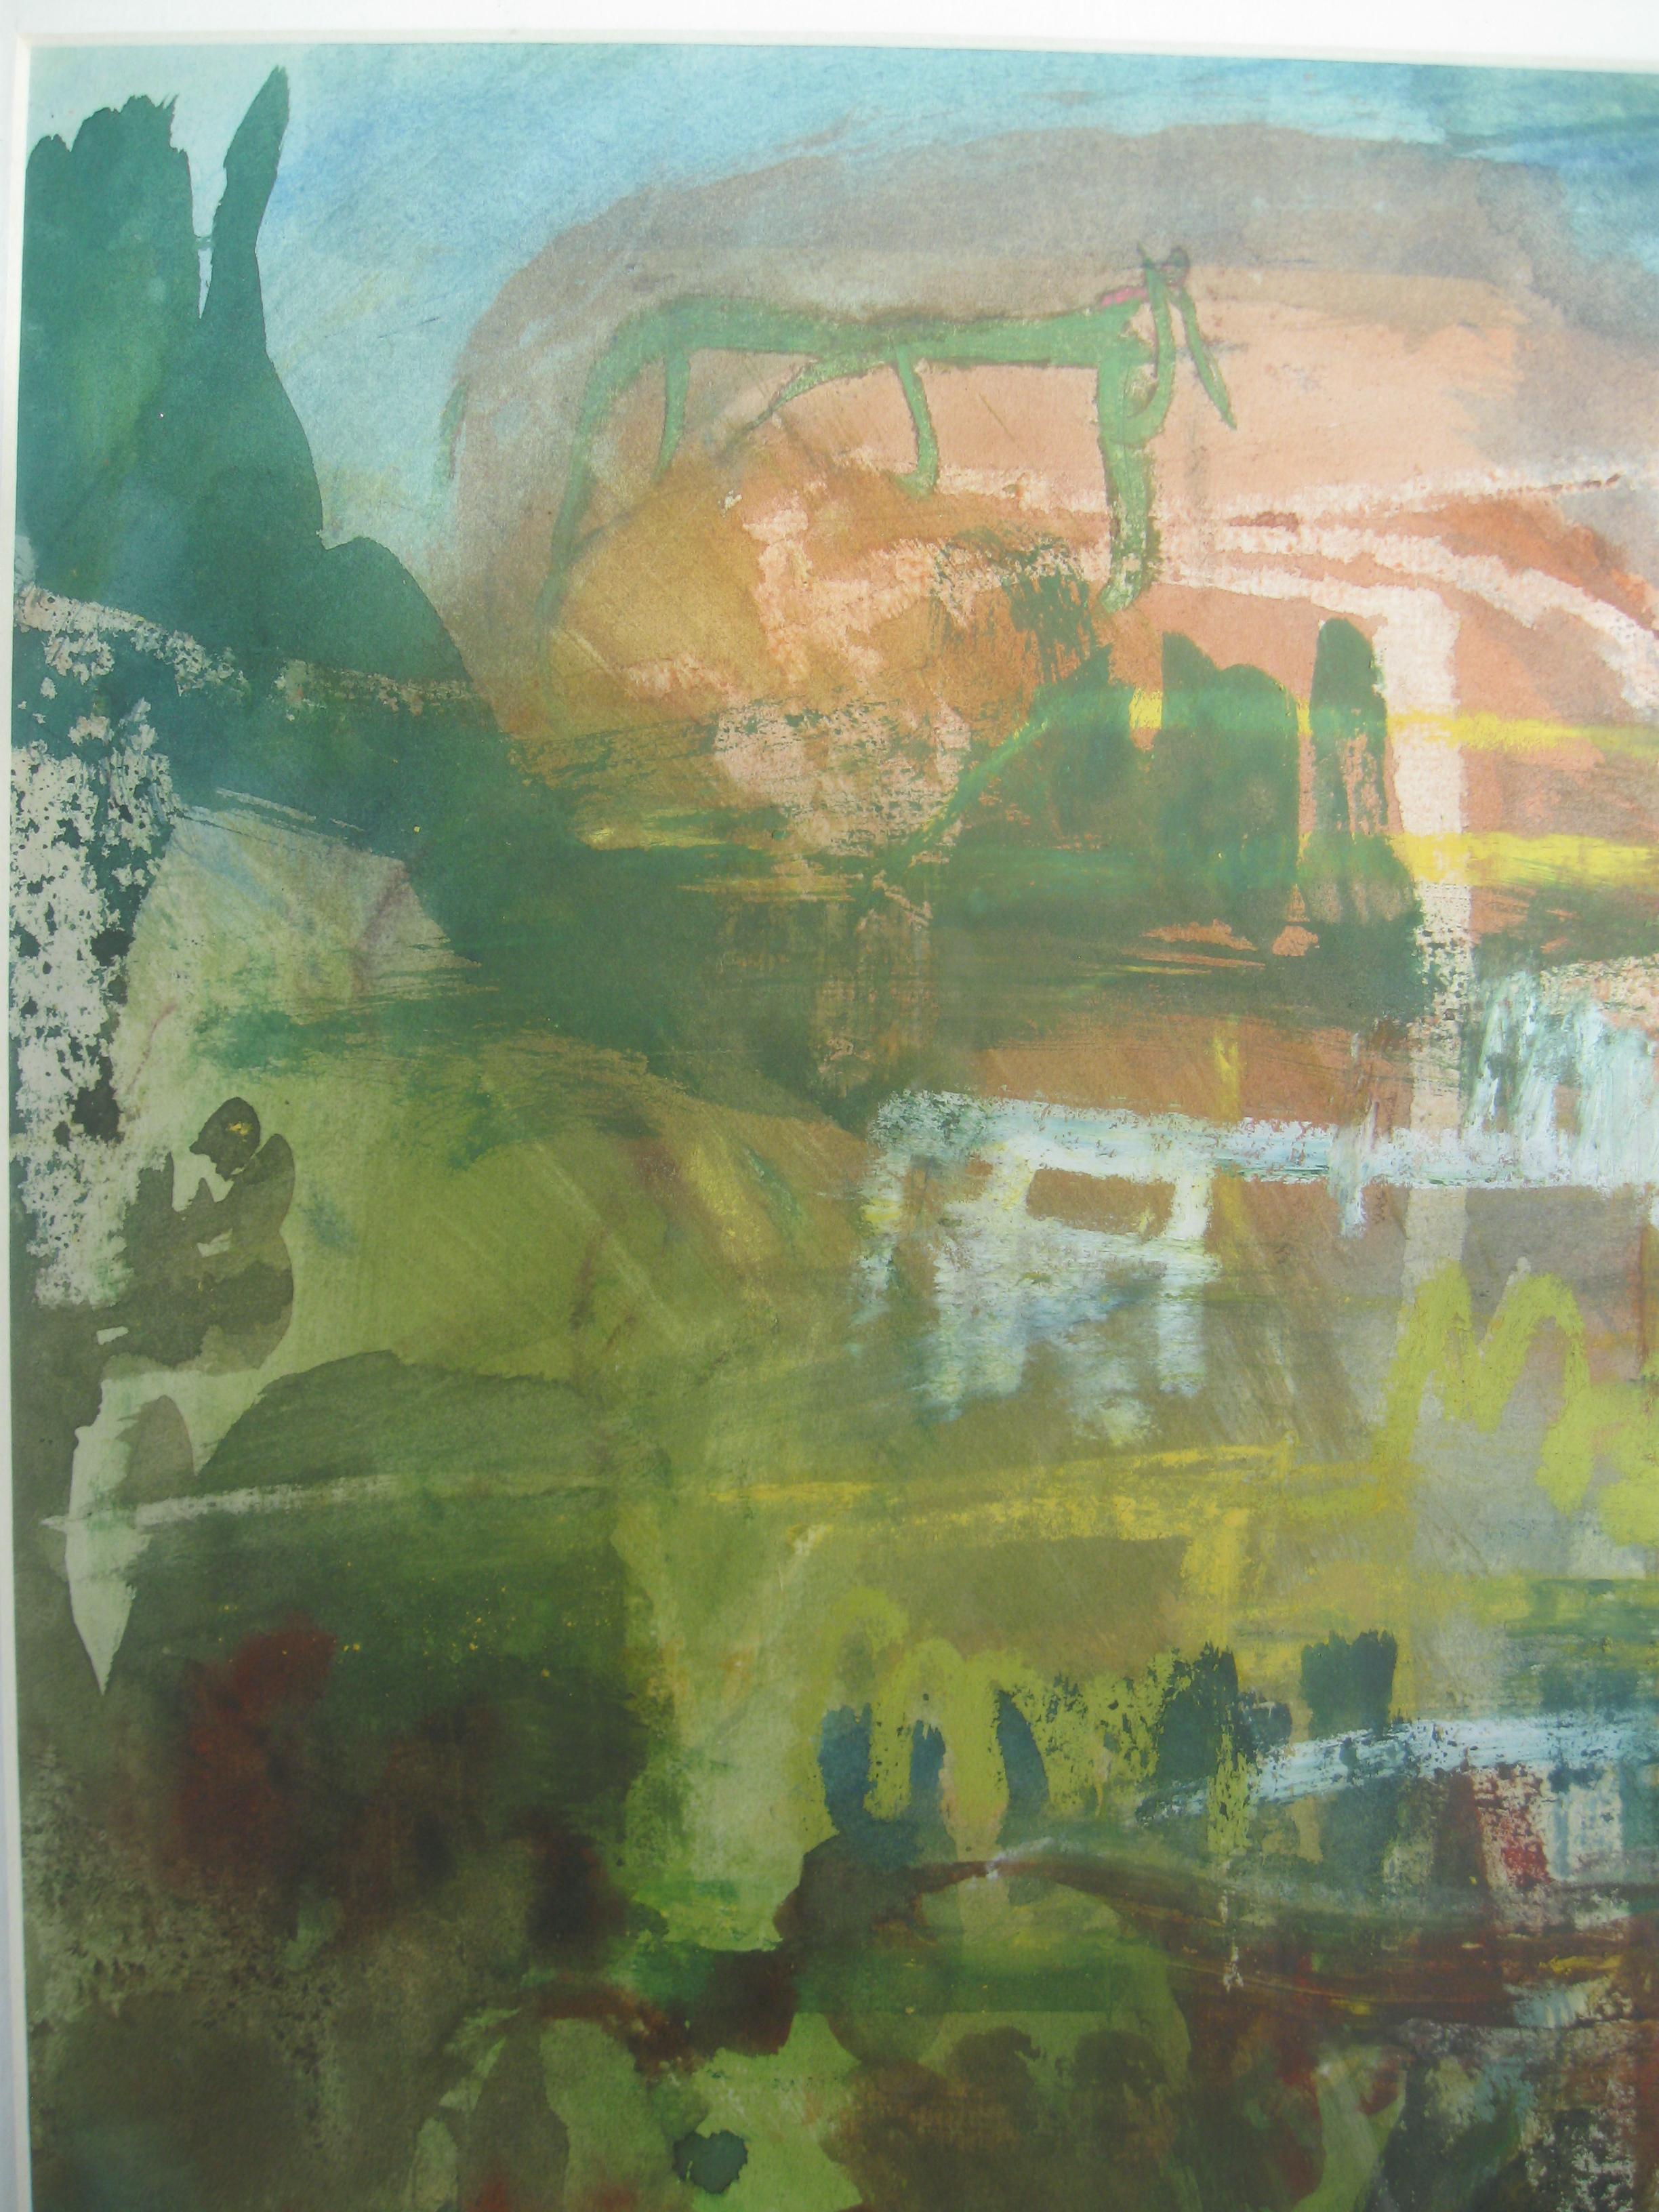 A fine piece from a series of paintings by Gradwell. This piece represents the sense of place throughout the Seasons. Light , time of day and weather. It's a very layered piece in mixed media . All marks are a changing patterns in time over a three